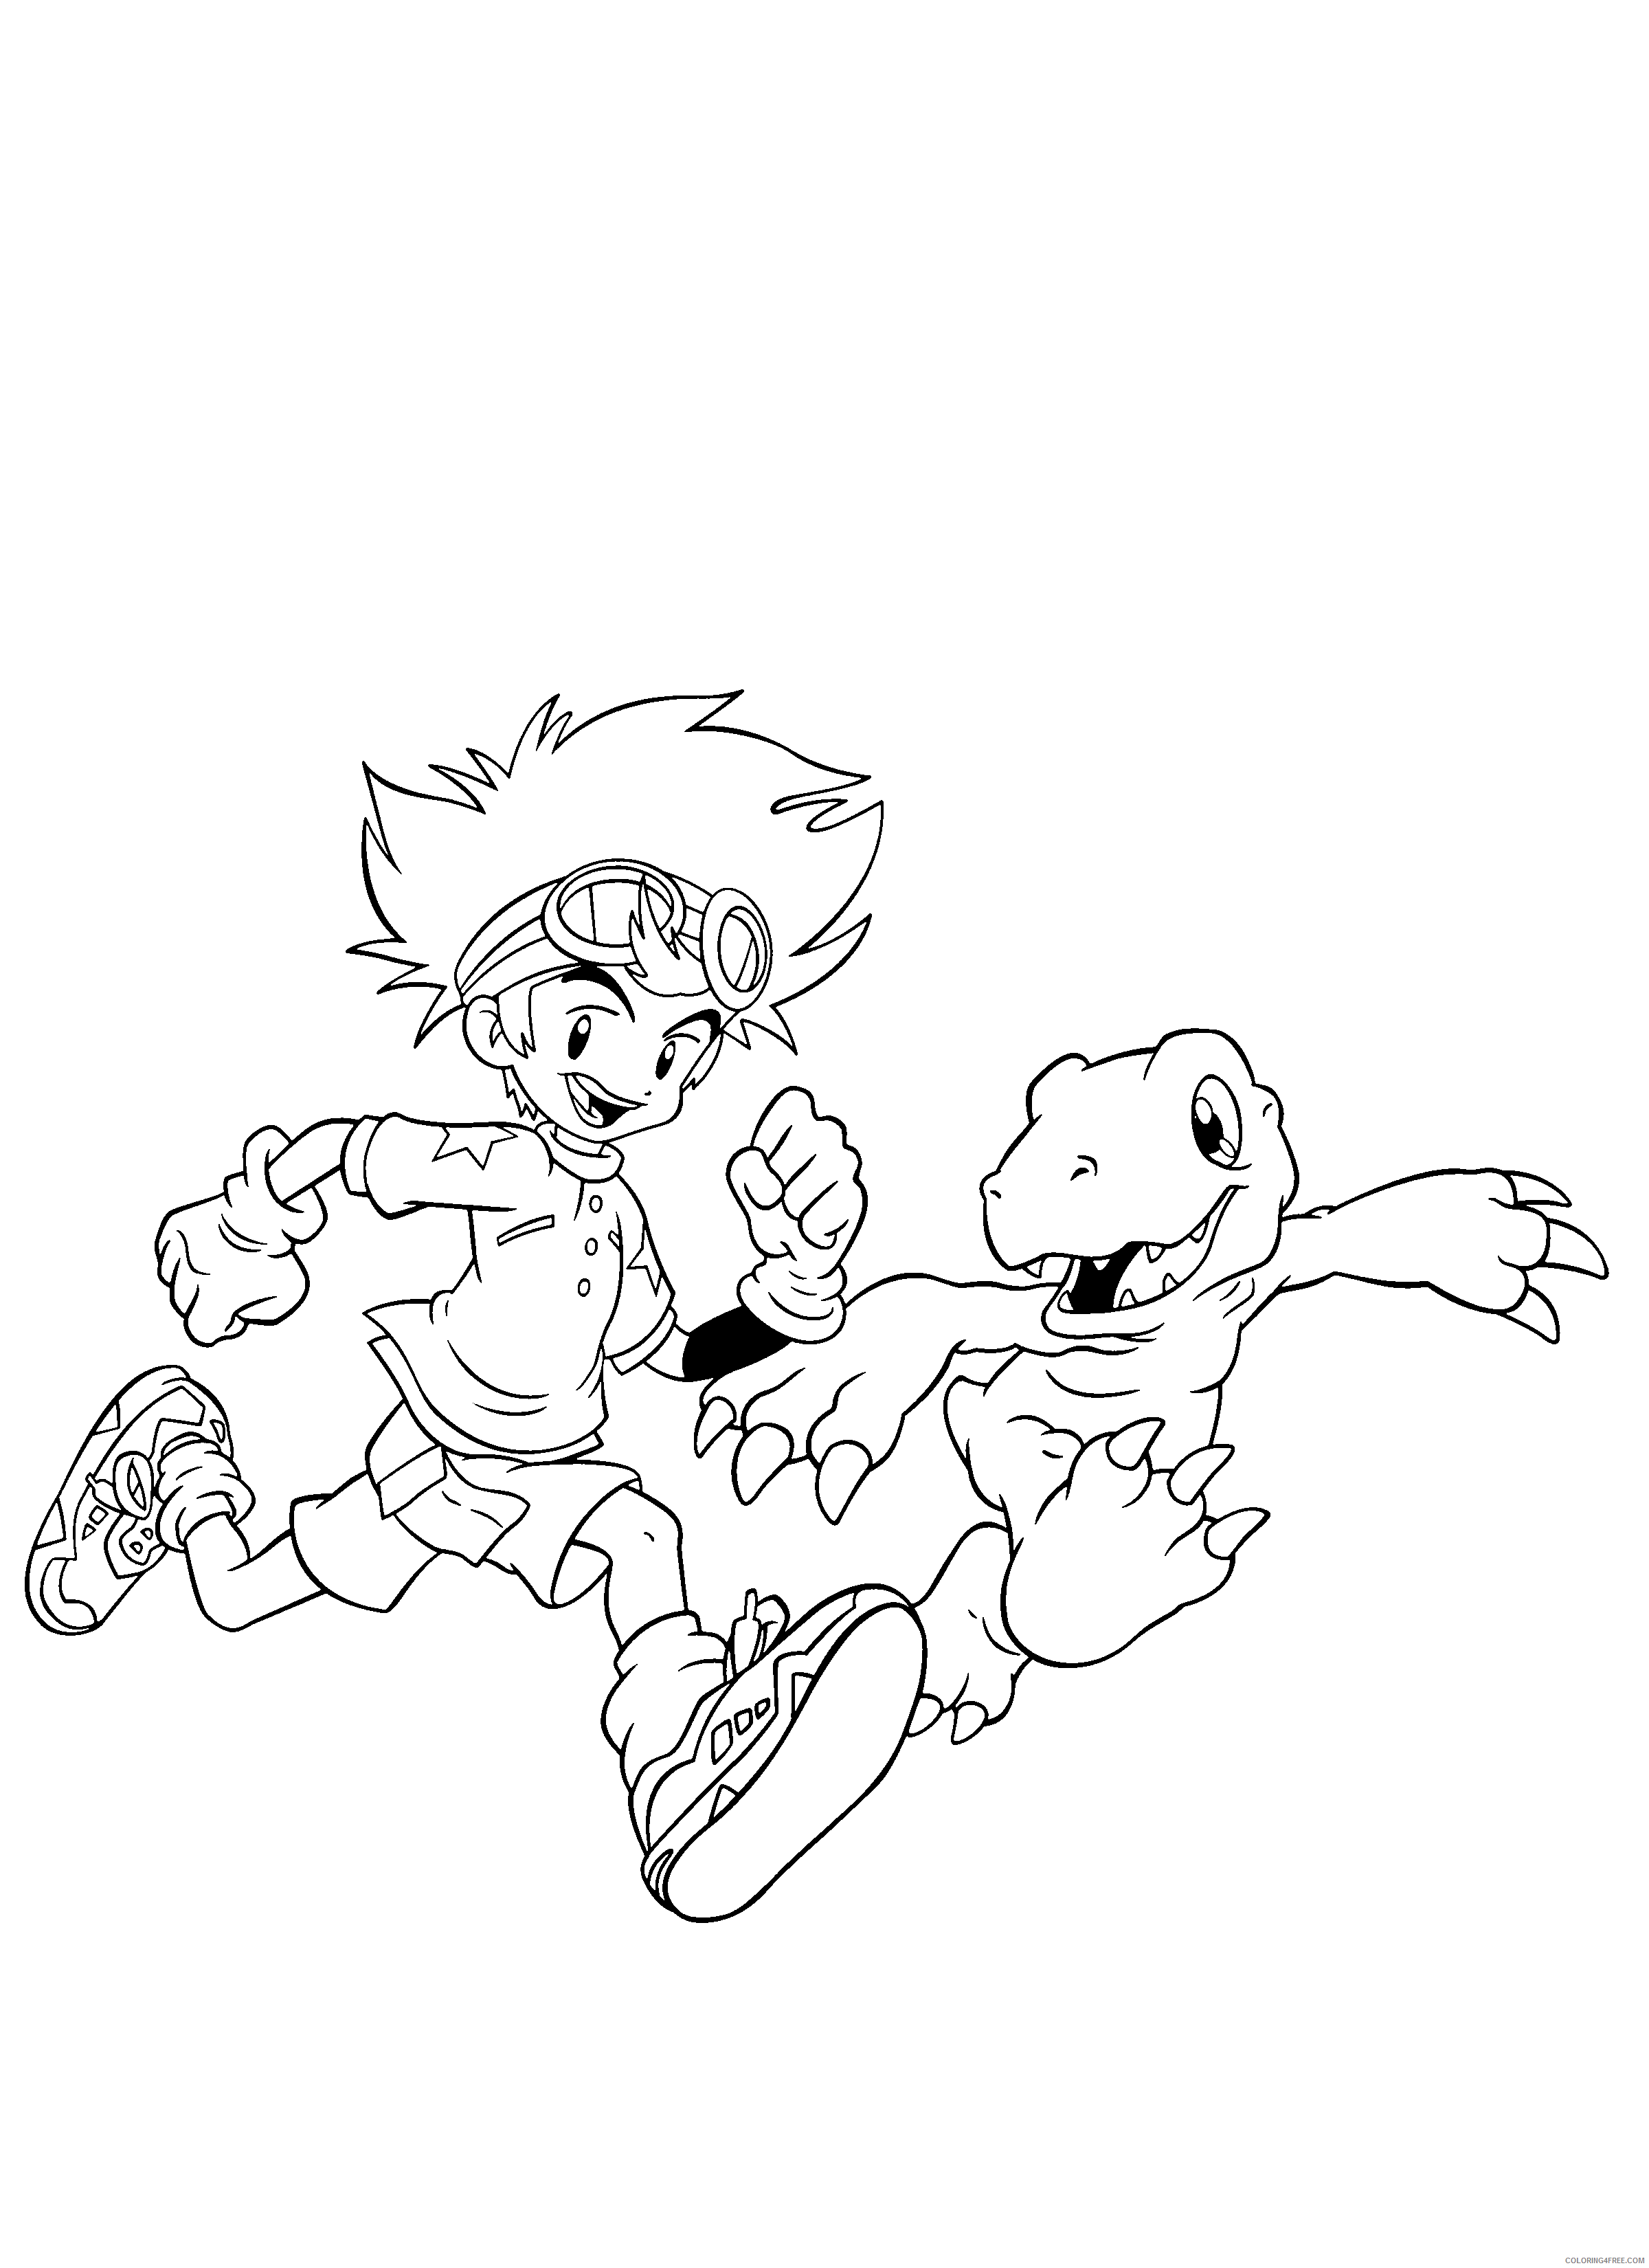 Digimon Printable Coloring Pages Anime digimon 271 2021 0350 Coloring4free